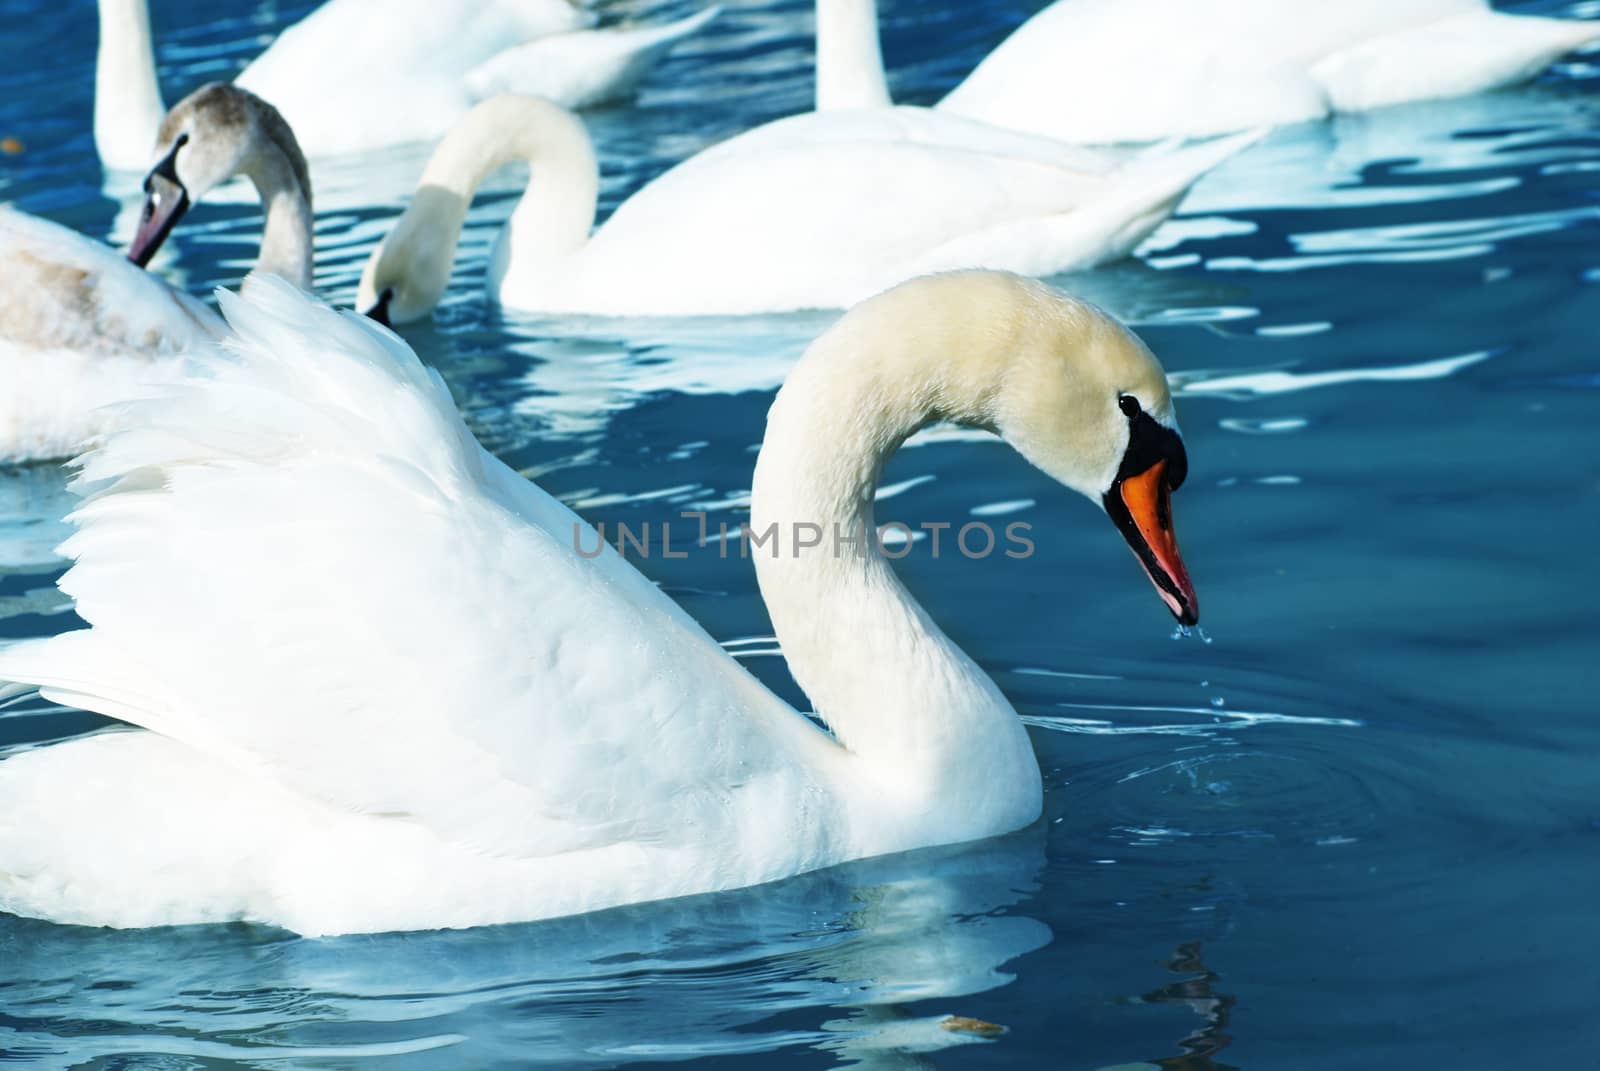 White swans on the lake with blue water